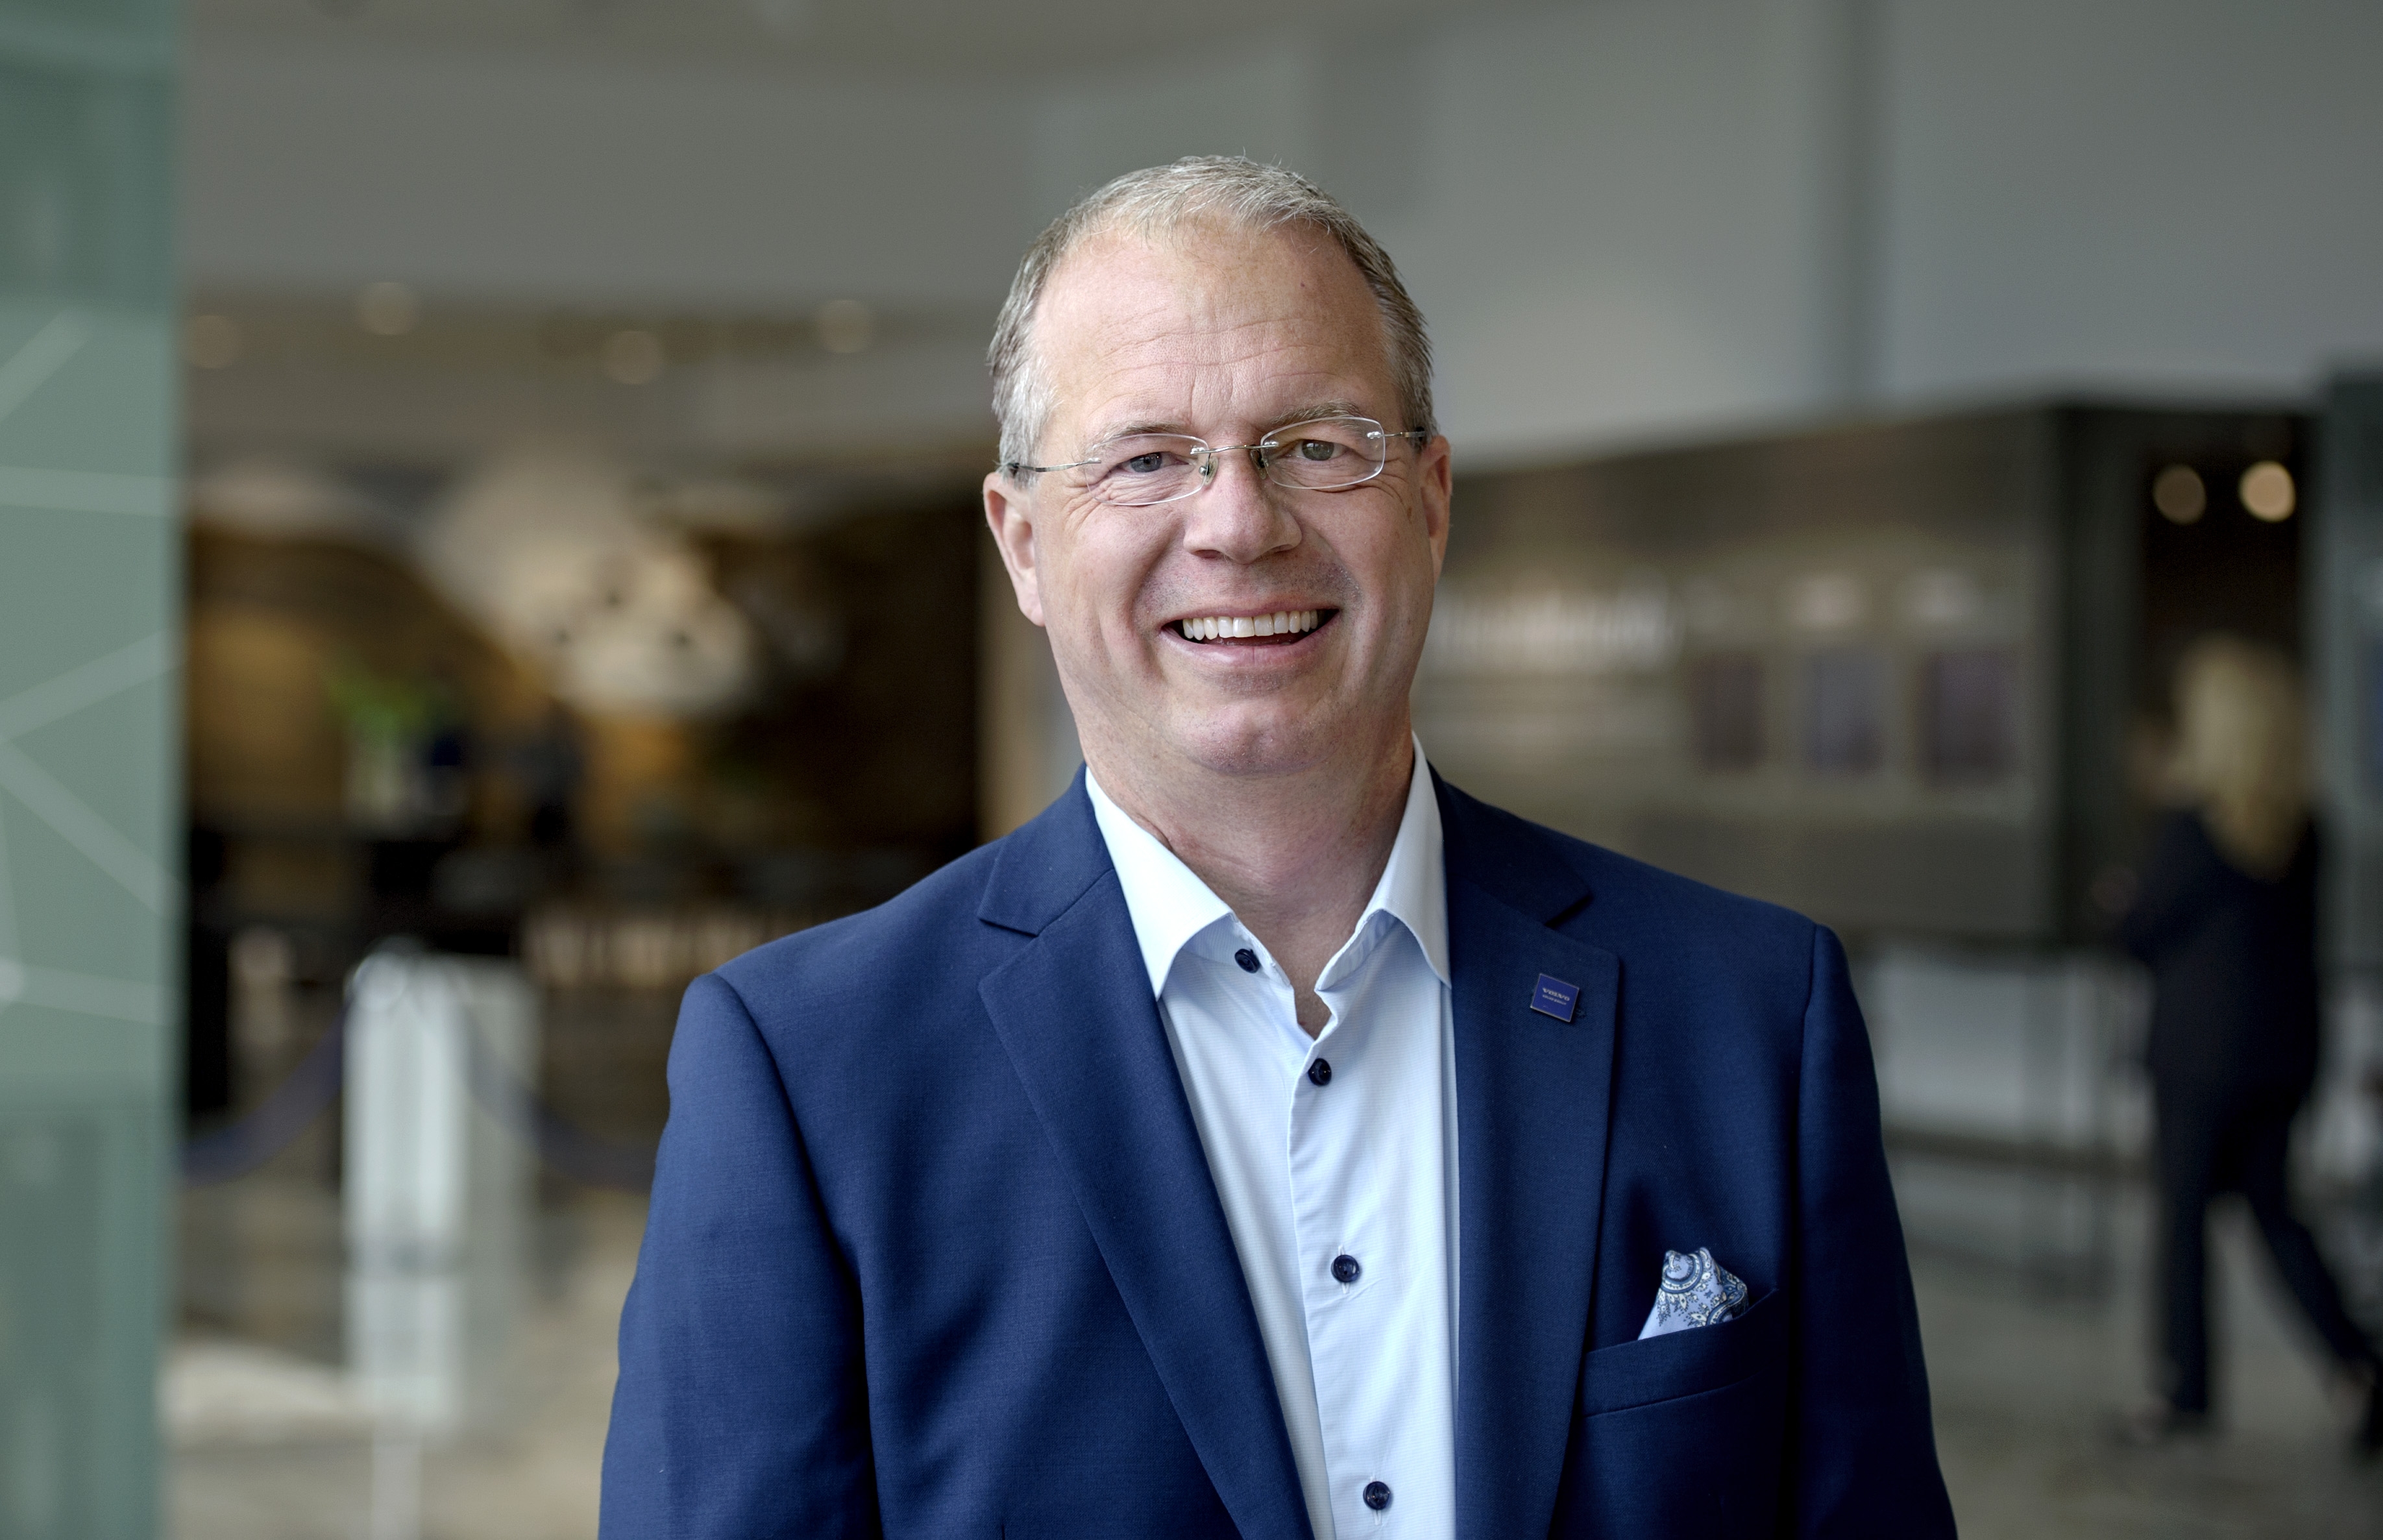 Martin Lundstedt, President, CEO, Volvo Group